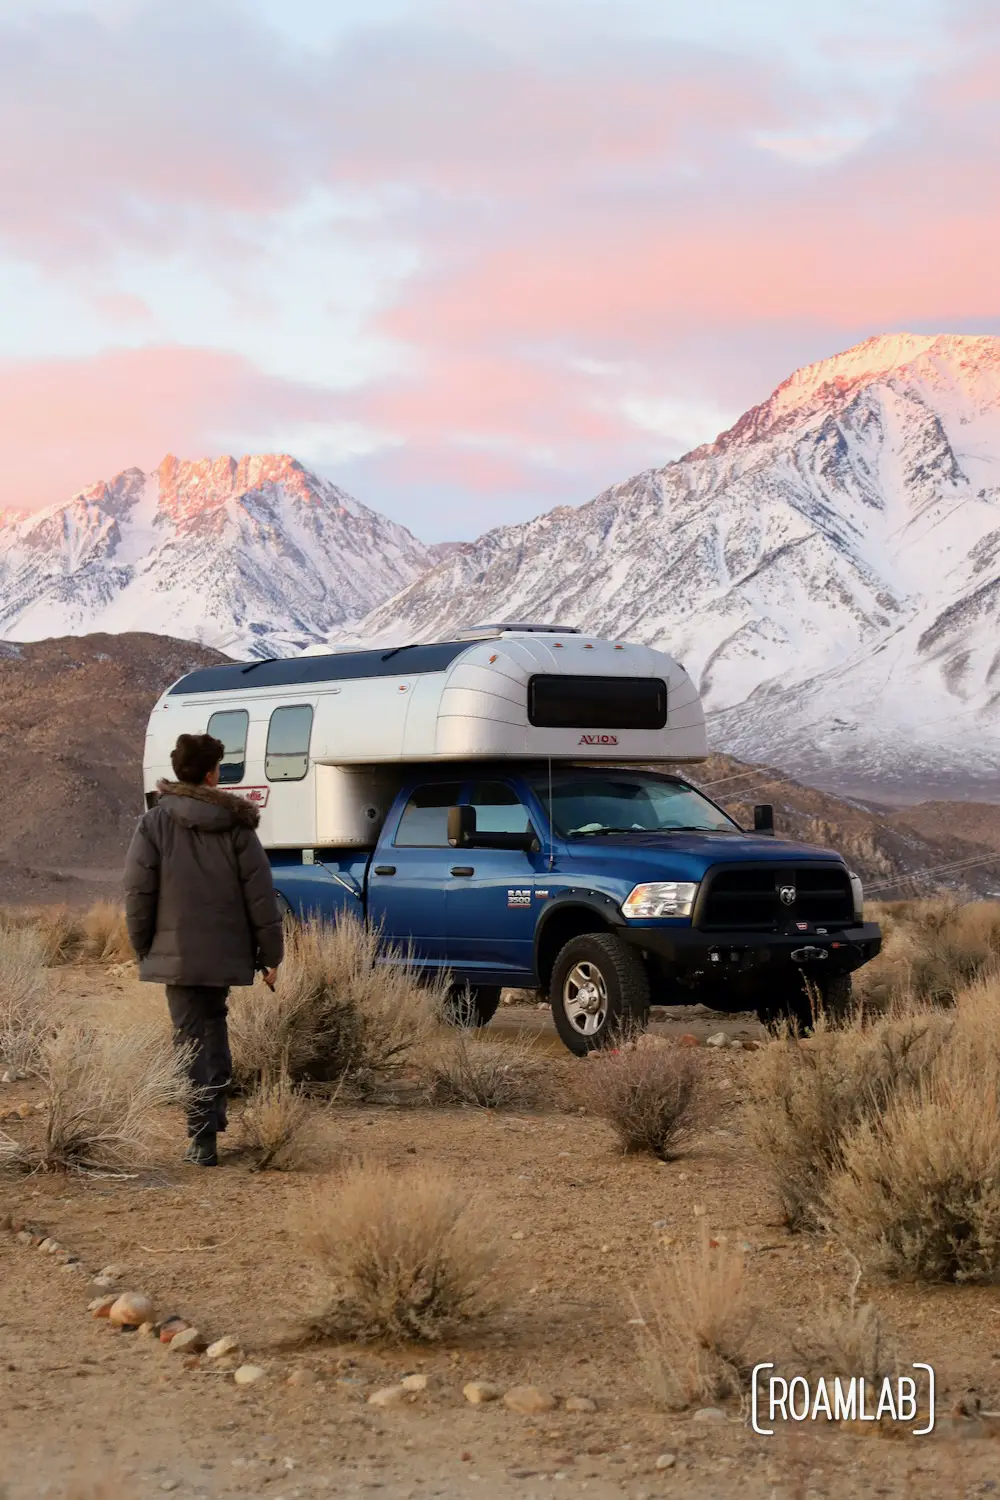 Man walking toward a 1970 Avion C11 truck camper with the pink tipped Sierra Nevada at dawn.